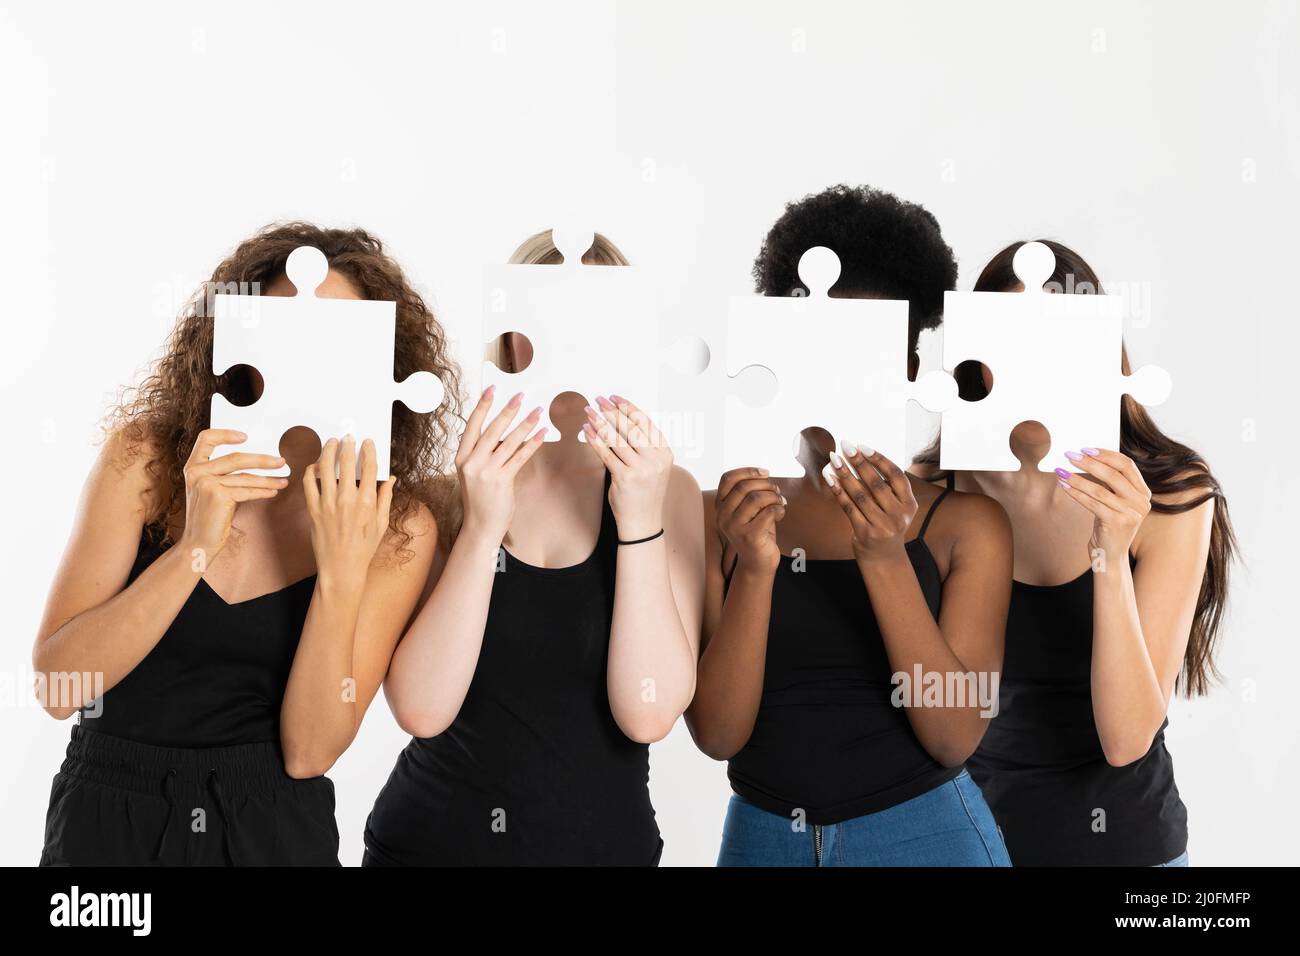 Four young girls are holding puzzles in their hands, covering their face to become anonymous and show that differences connect, Stock Photo